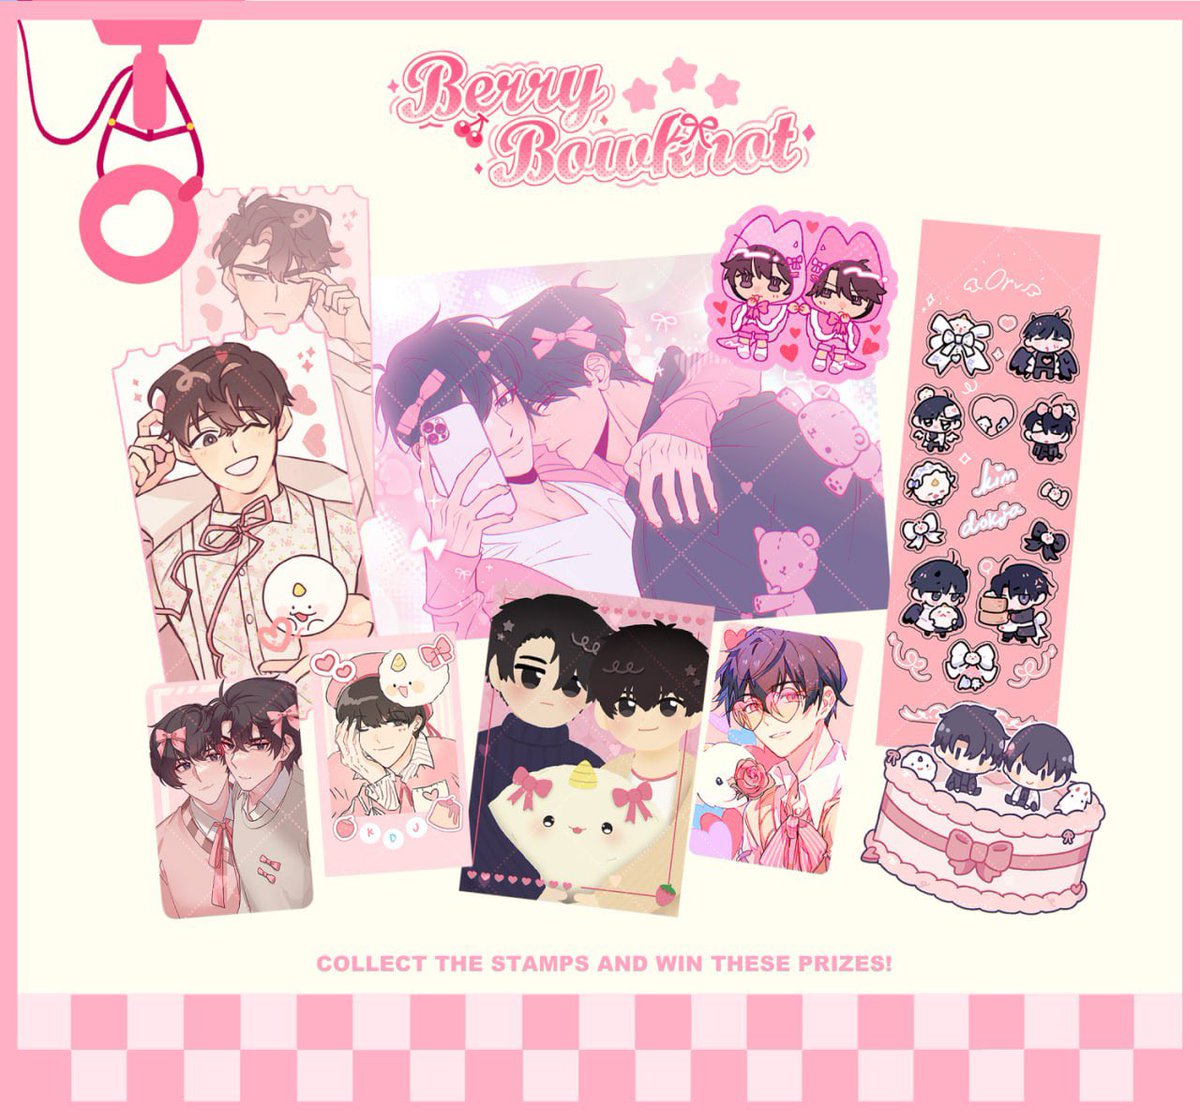 Visit all the artists and collect the stamps to get this cute prize bundle 🎀 There are limited prize sets per day so stop by as soon as you can.

See you this weekend! 